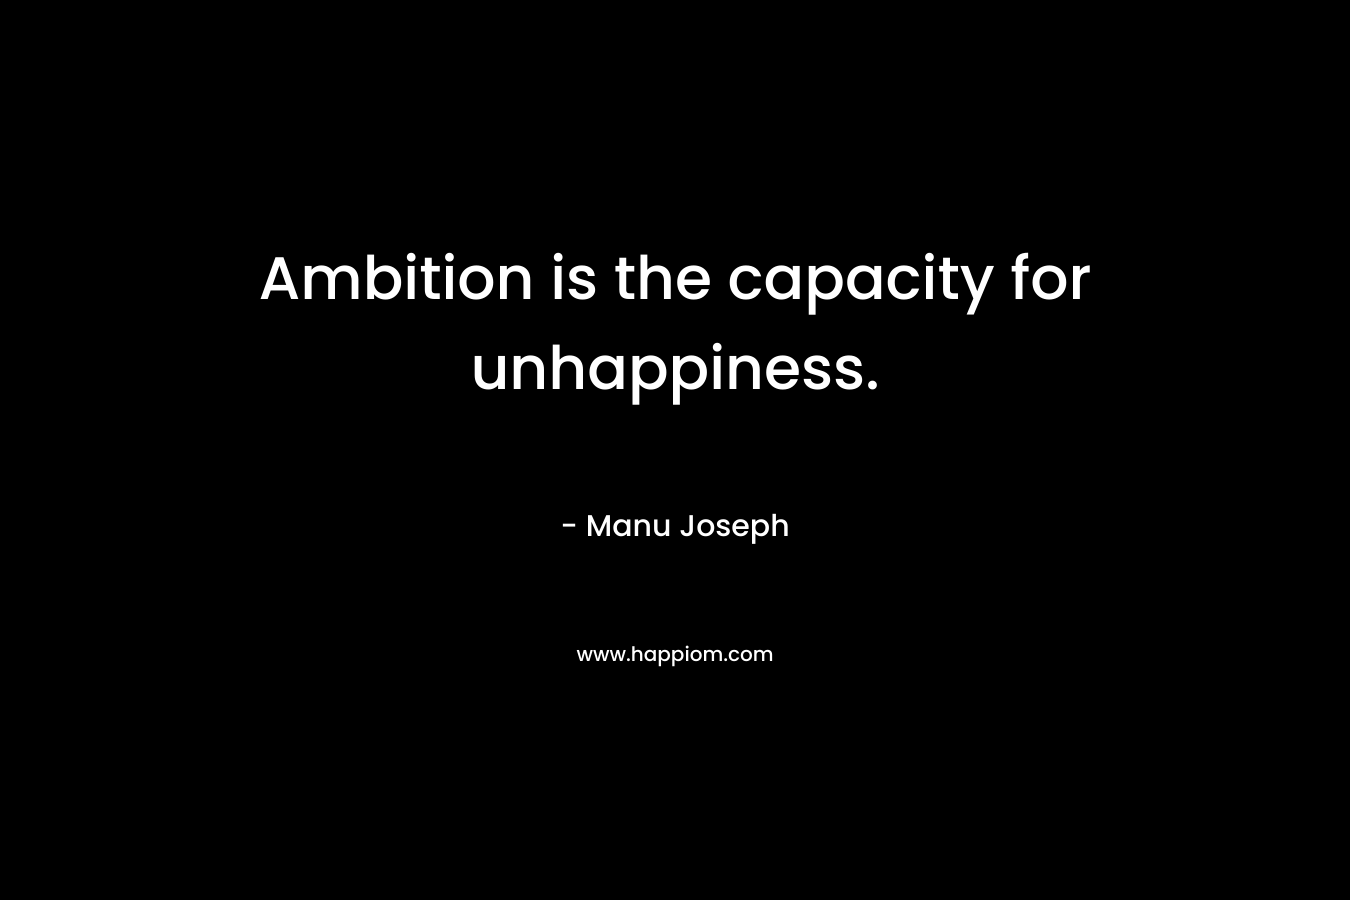 Ambition is the capacity for unhappiness.